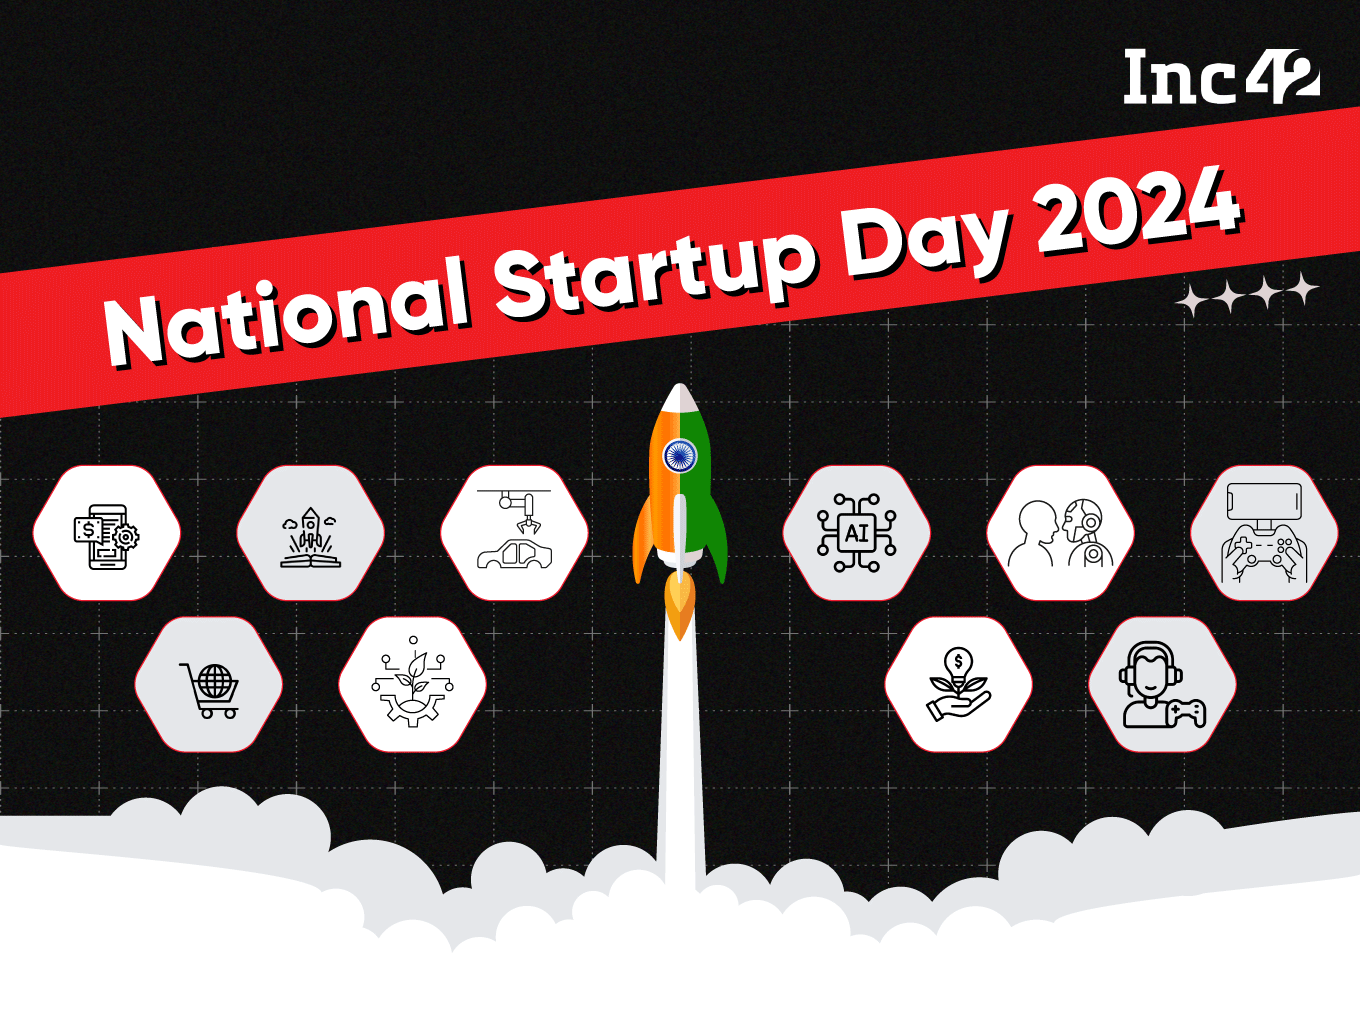 National Startup Day 2024: Indian Tech's Next Decade Begins Now